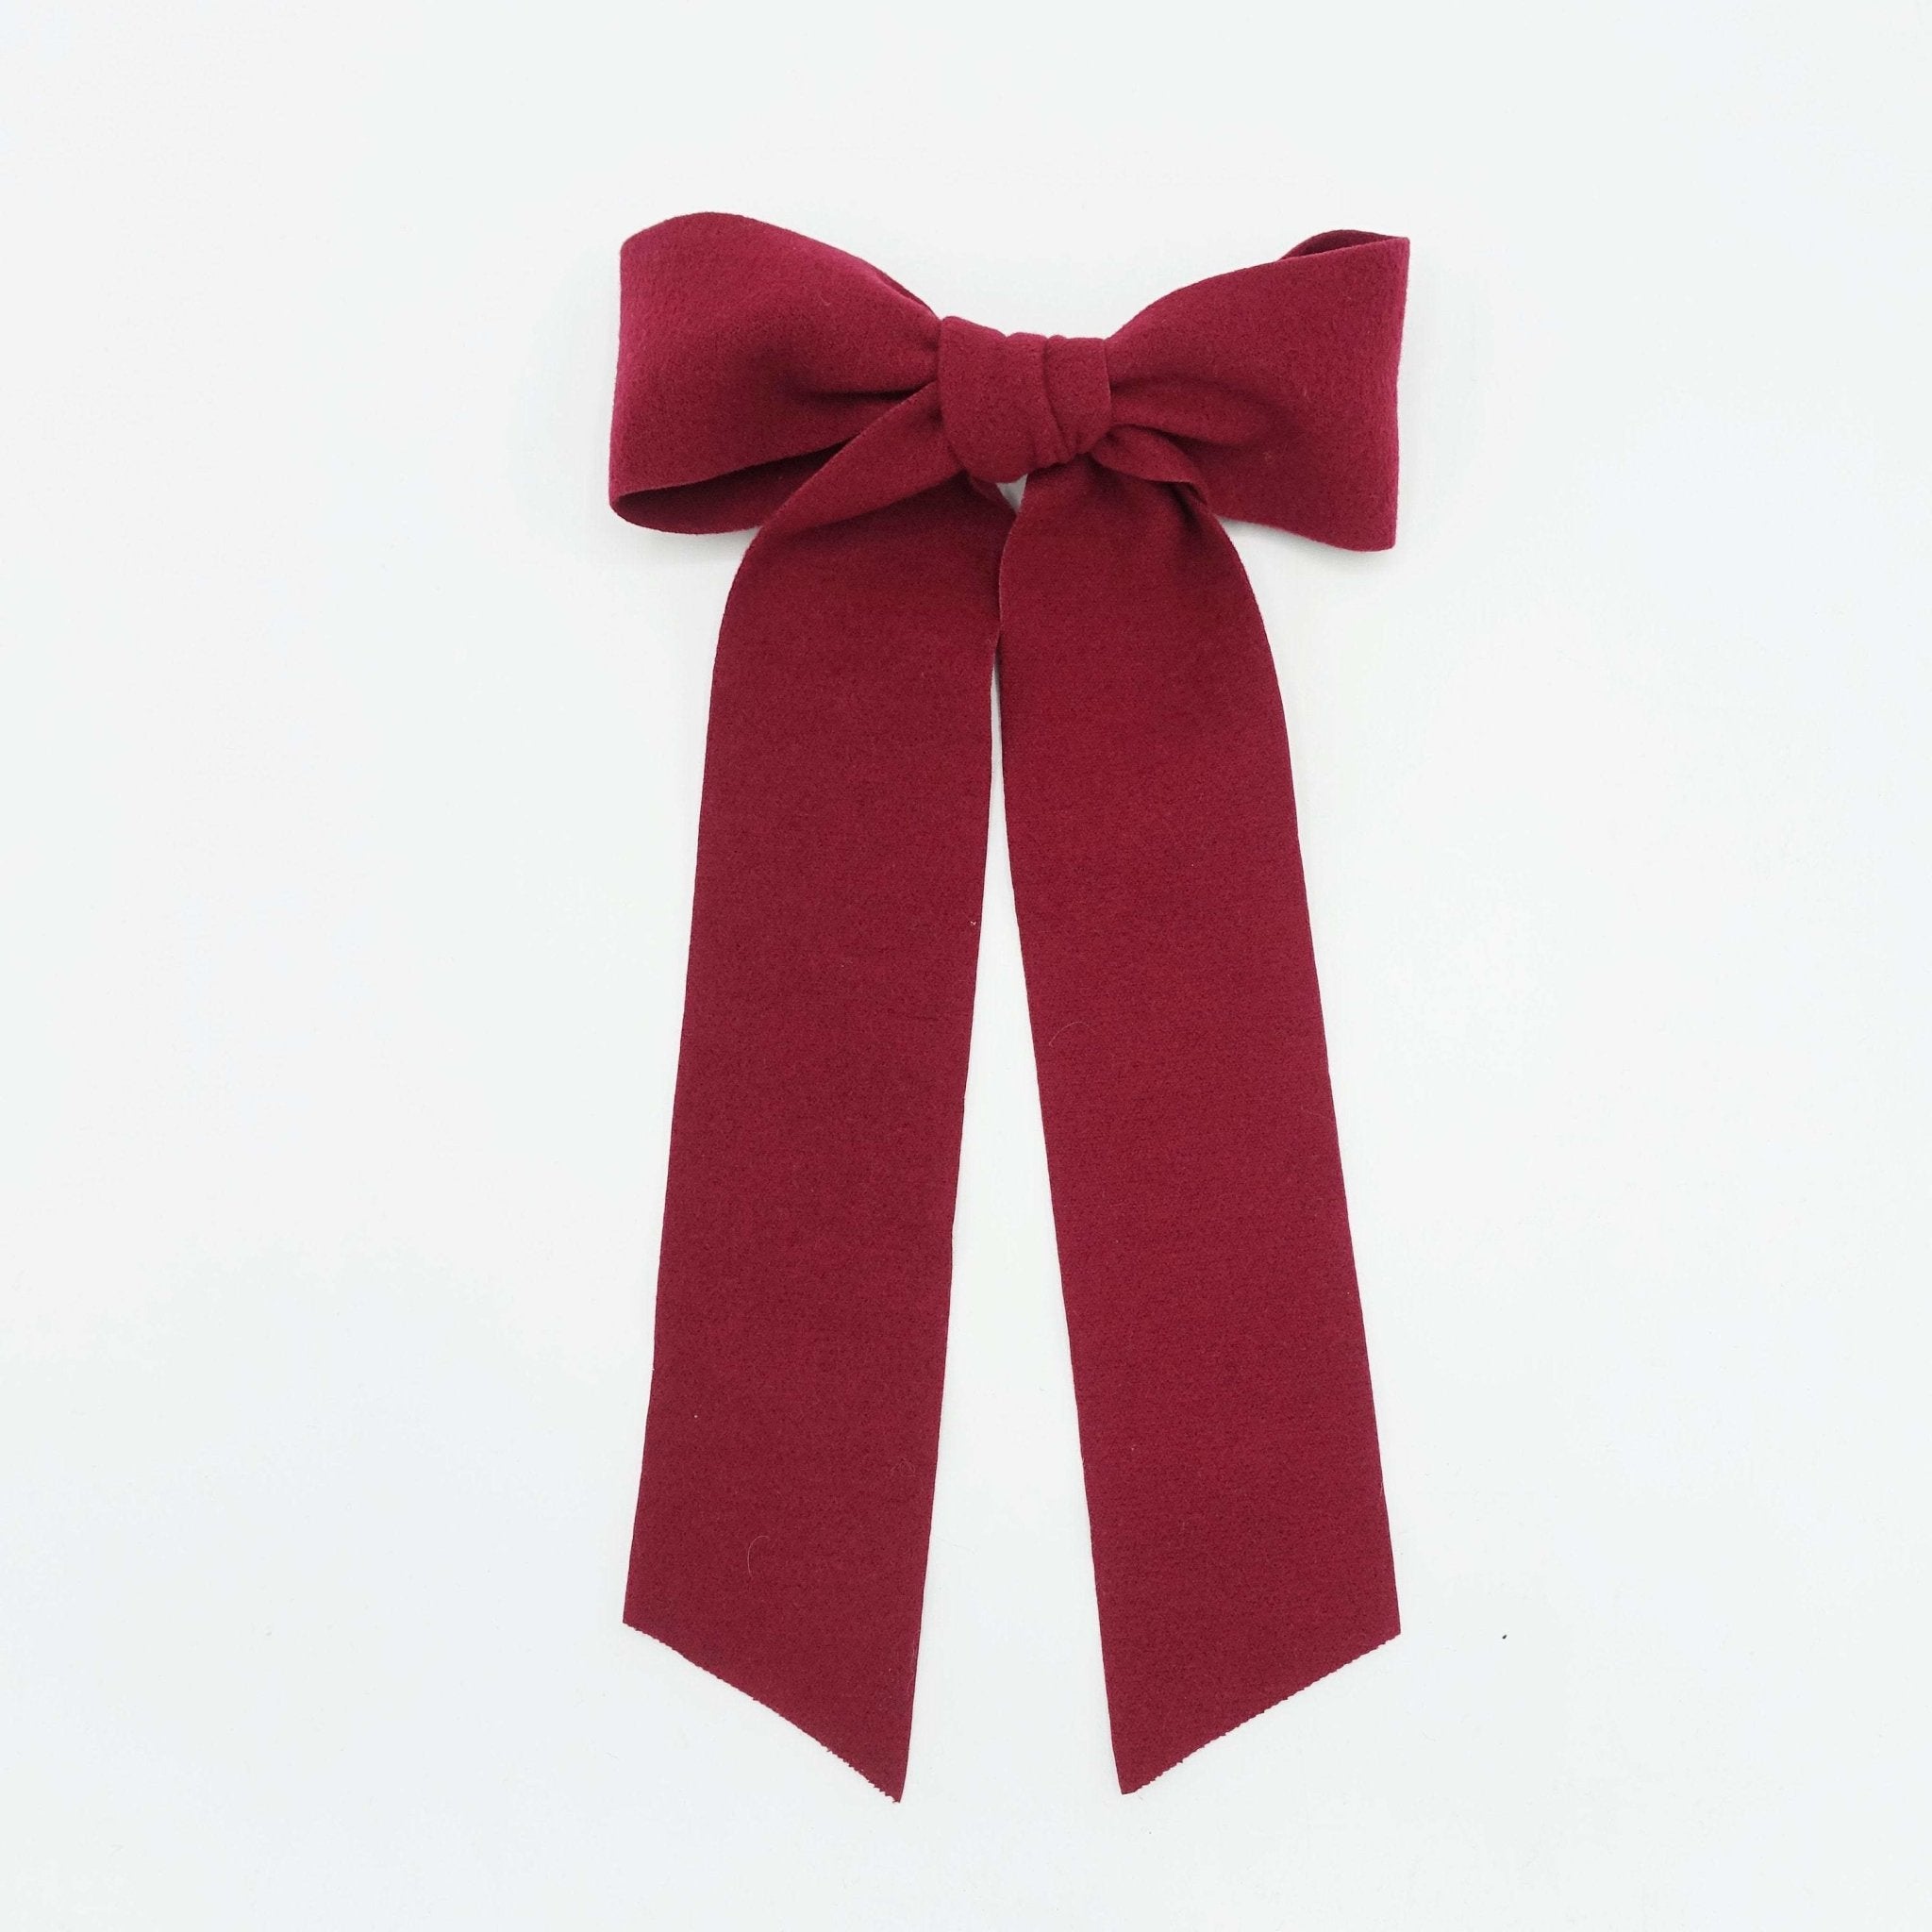 veryshine.com Barrettes & Clips Red wine long tail woolen hair bow stylish accessory for women